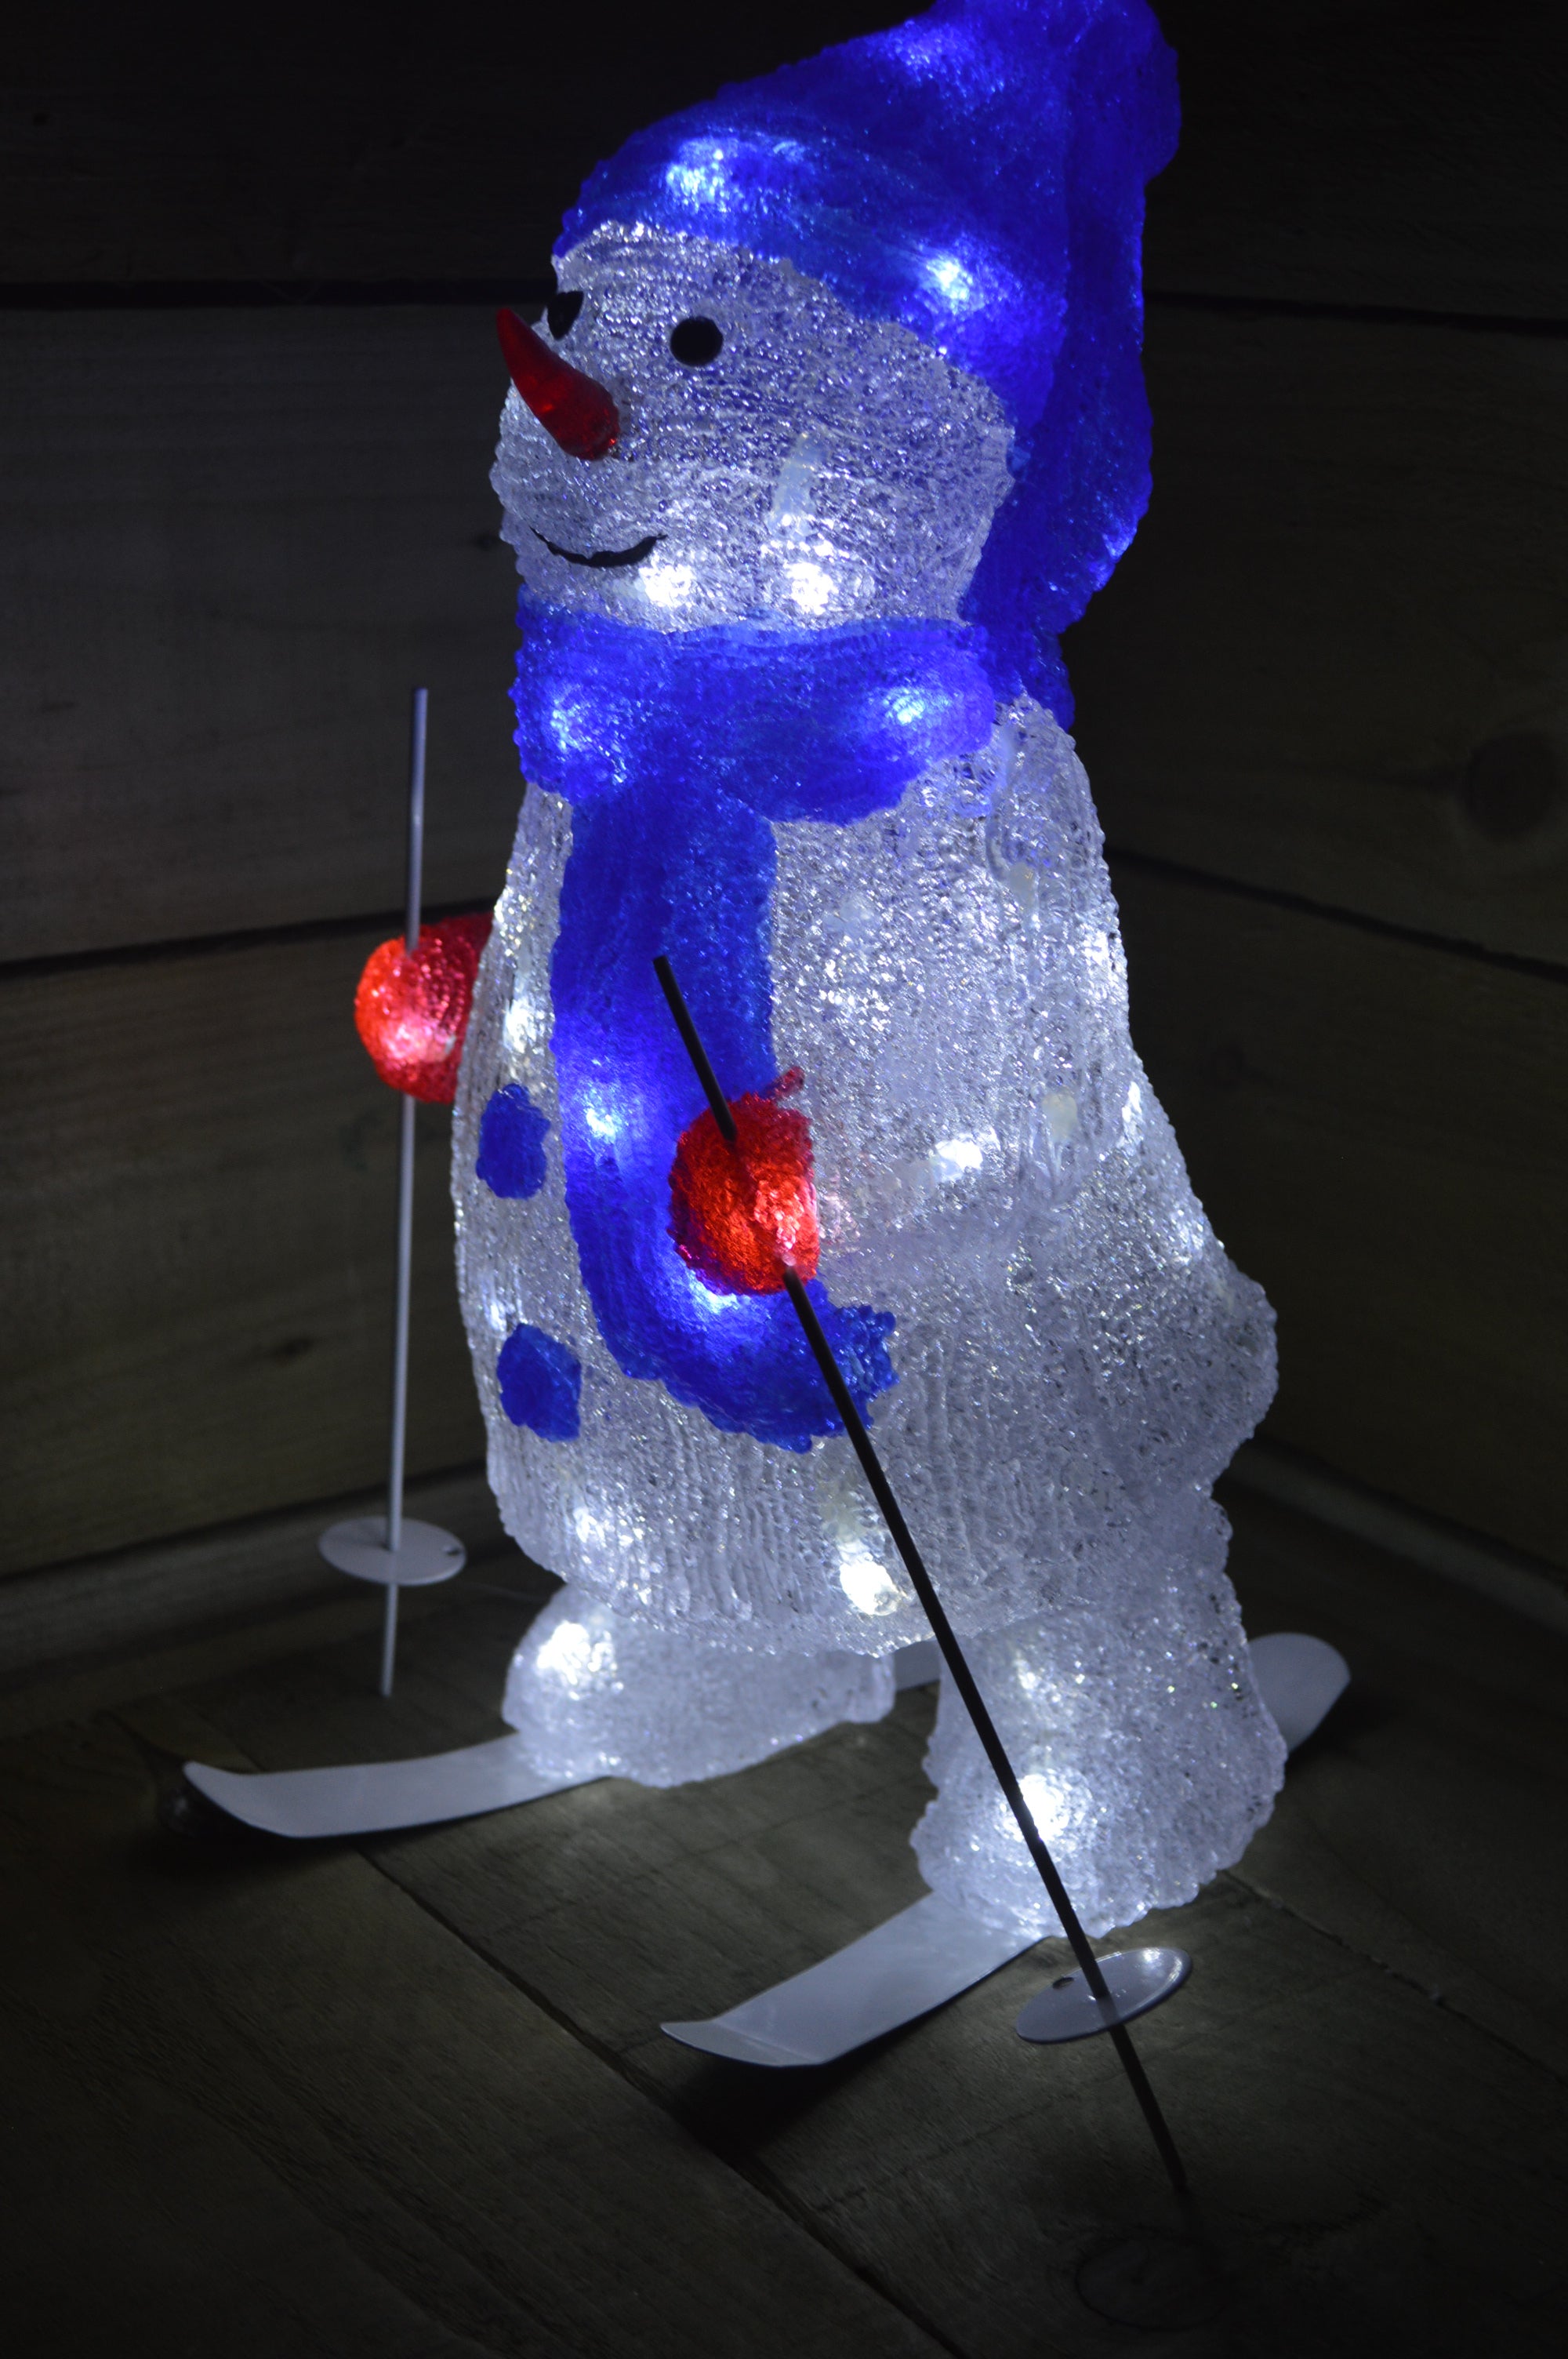 40cm Skiing Snowman Christmas Decoration with 48 Ice White LEDs with a 10m Cable